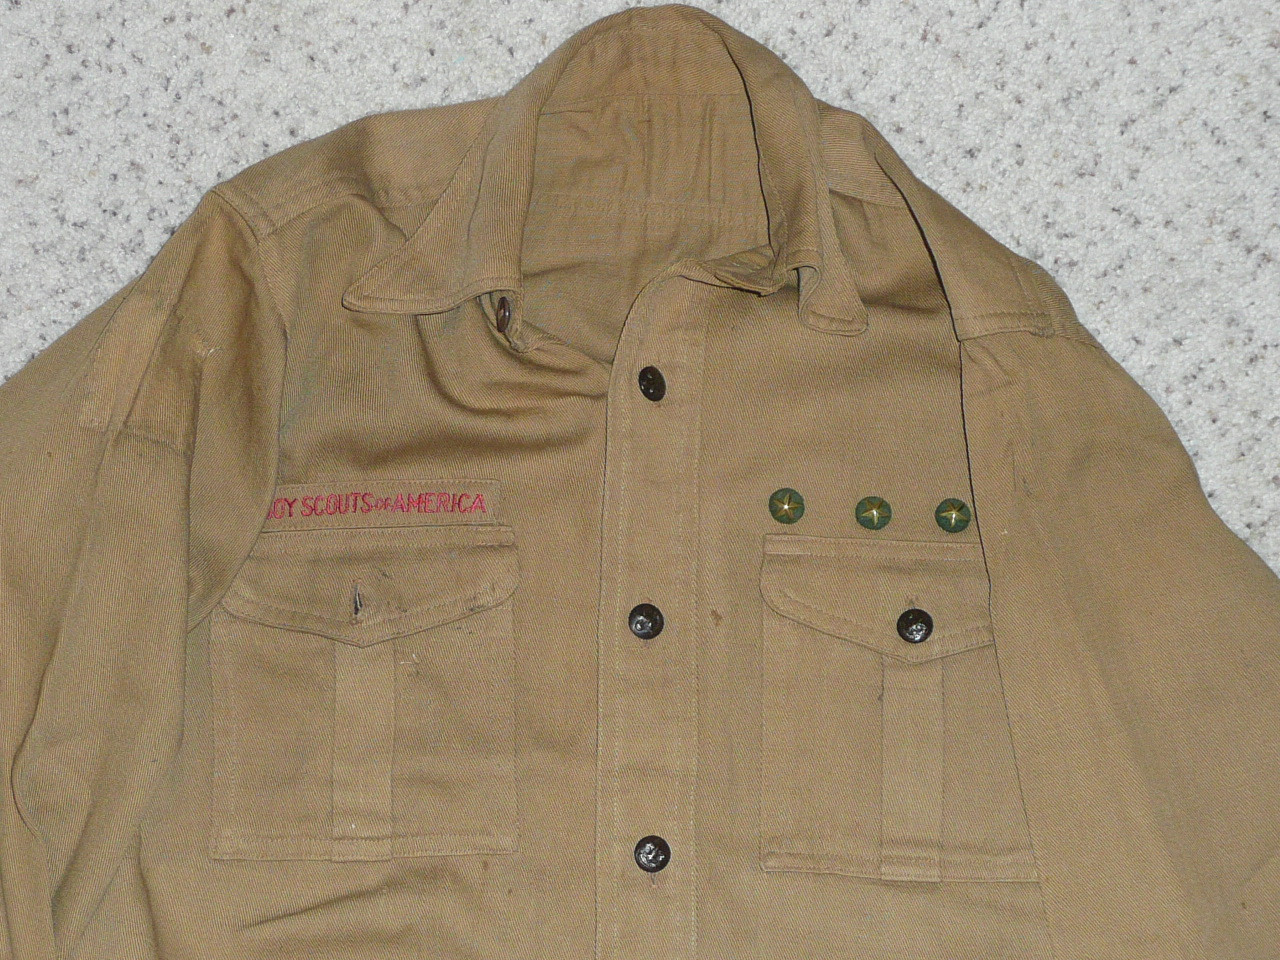 1930's Boy Scout Uniform Shirt with metal buttons, 19" Chest and 26" Length, #FB41